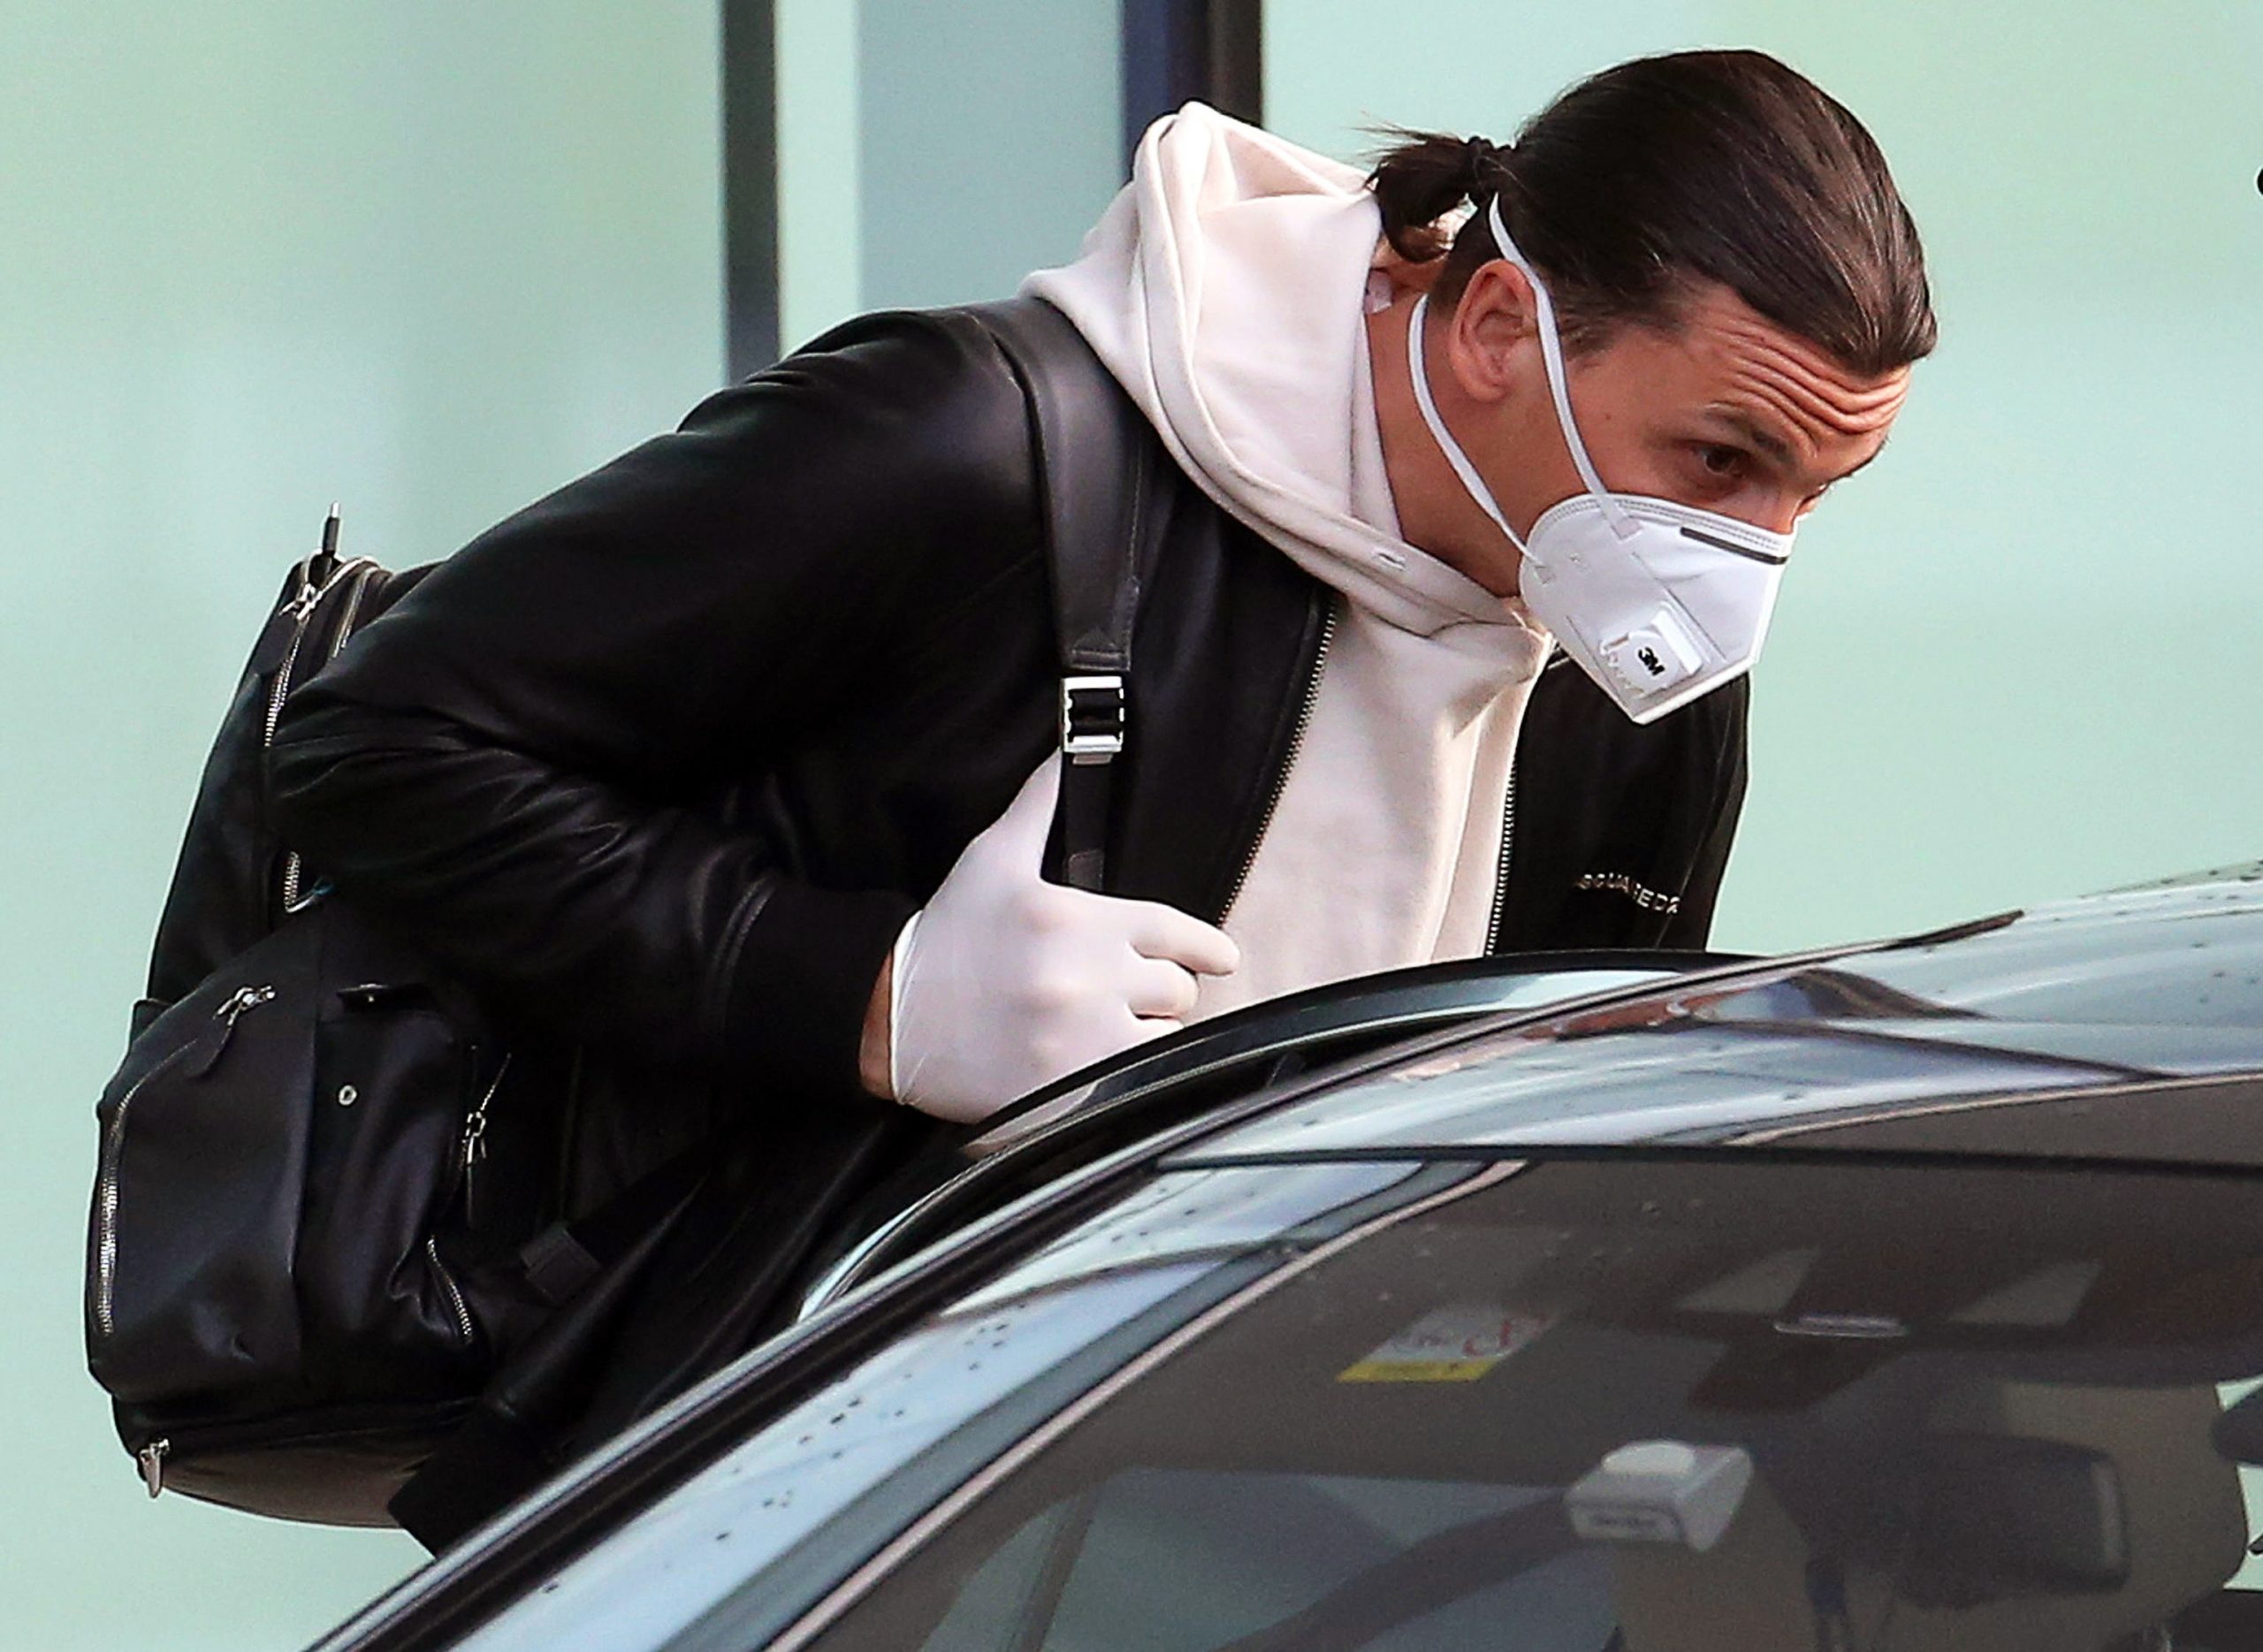 epa08415593 AC Milan's Swedish striker Zlatan Ibrahimovic wearing a protective face mask arrives at Malpensa airport in Milan, Italy, 11 May 2020, amid the ongoing coronavirus COVID-19 pandemic. Ibrahimovic will stay under quarantine at the Milanello sports center, where he will train in individual mode in the absence of his teammates. Ibrahimovic has spent the past two months in Sweden, where he trained at Swedish soccer club Hammarby IF, which he co-owns.  EPA/MATTEO BAZZI